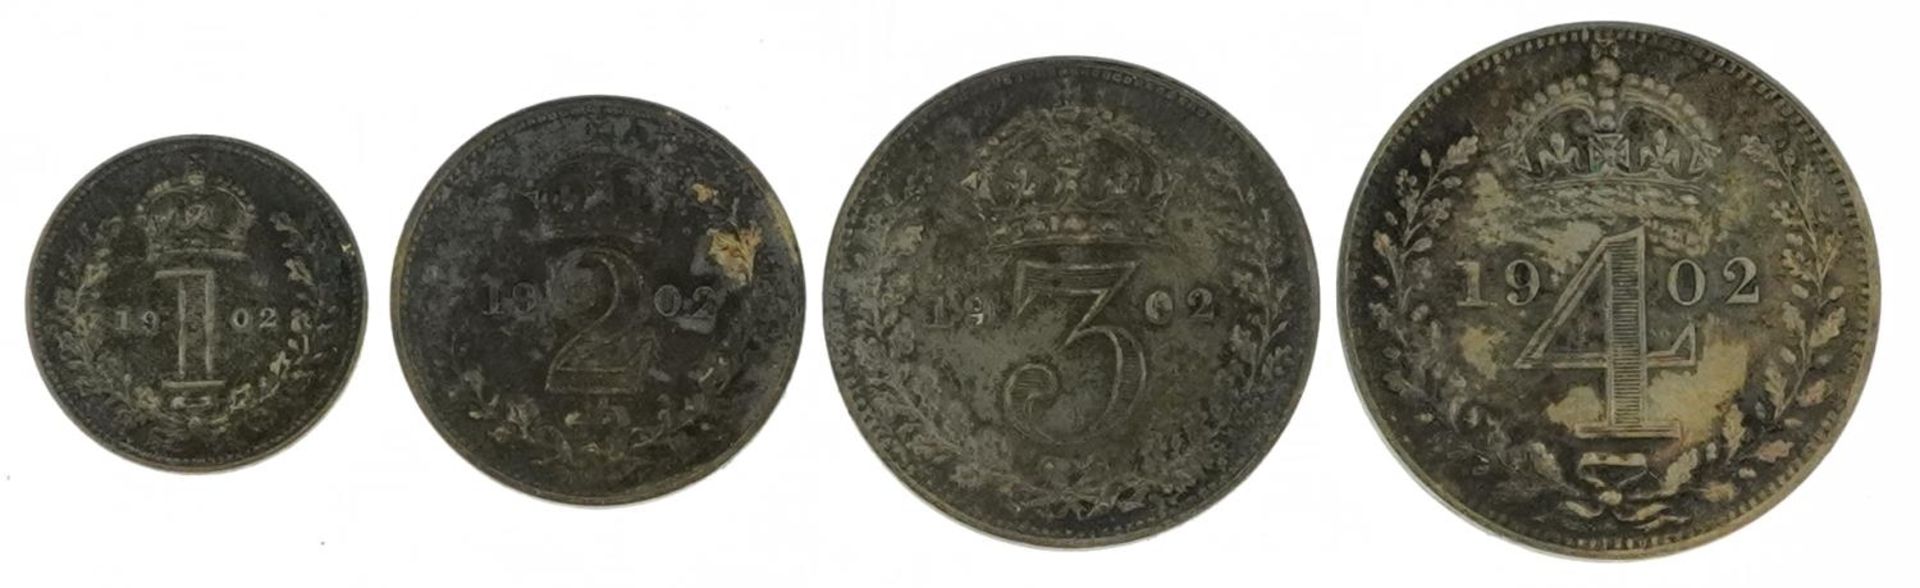 Edward VII 1902 Maundy four coin set housed in a silk and velvet lined fitted tooled leather - Image 2 of 4